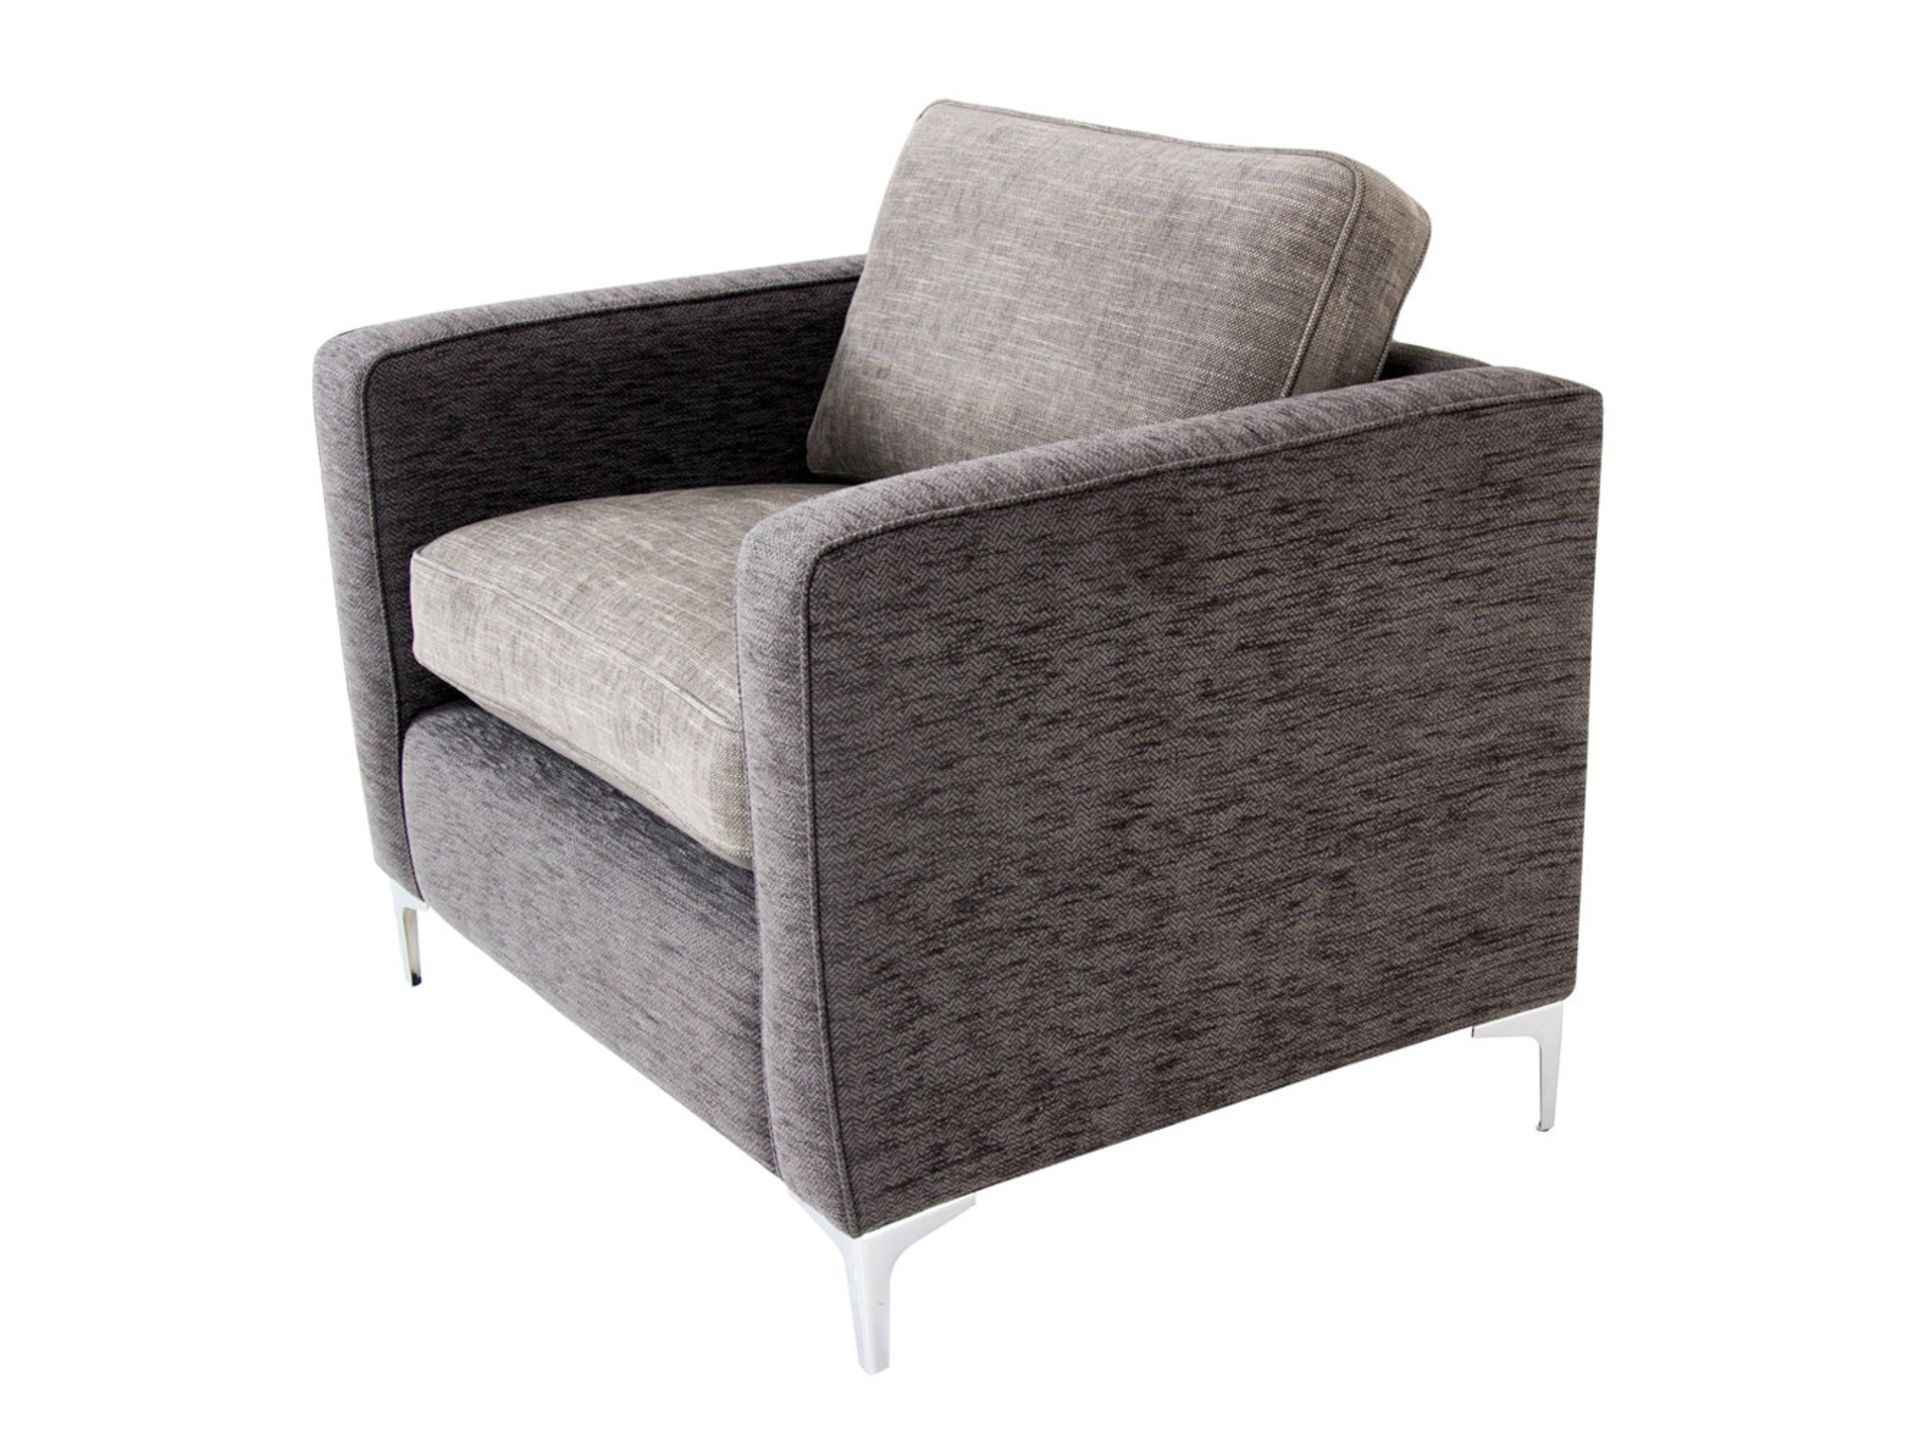 1 x Heyworth Snuggler Chair With Pewter & Cloud Fabric Upholstery - RRP £949! - Image 2 of 5